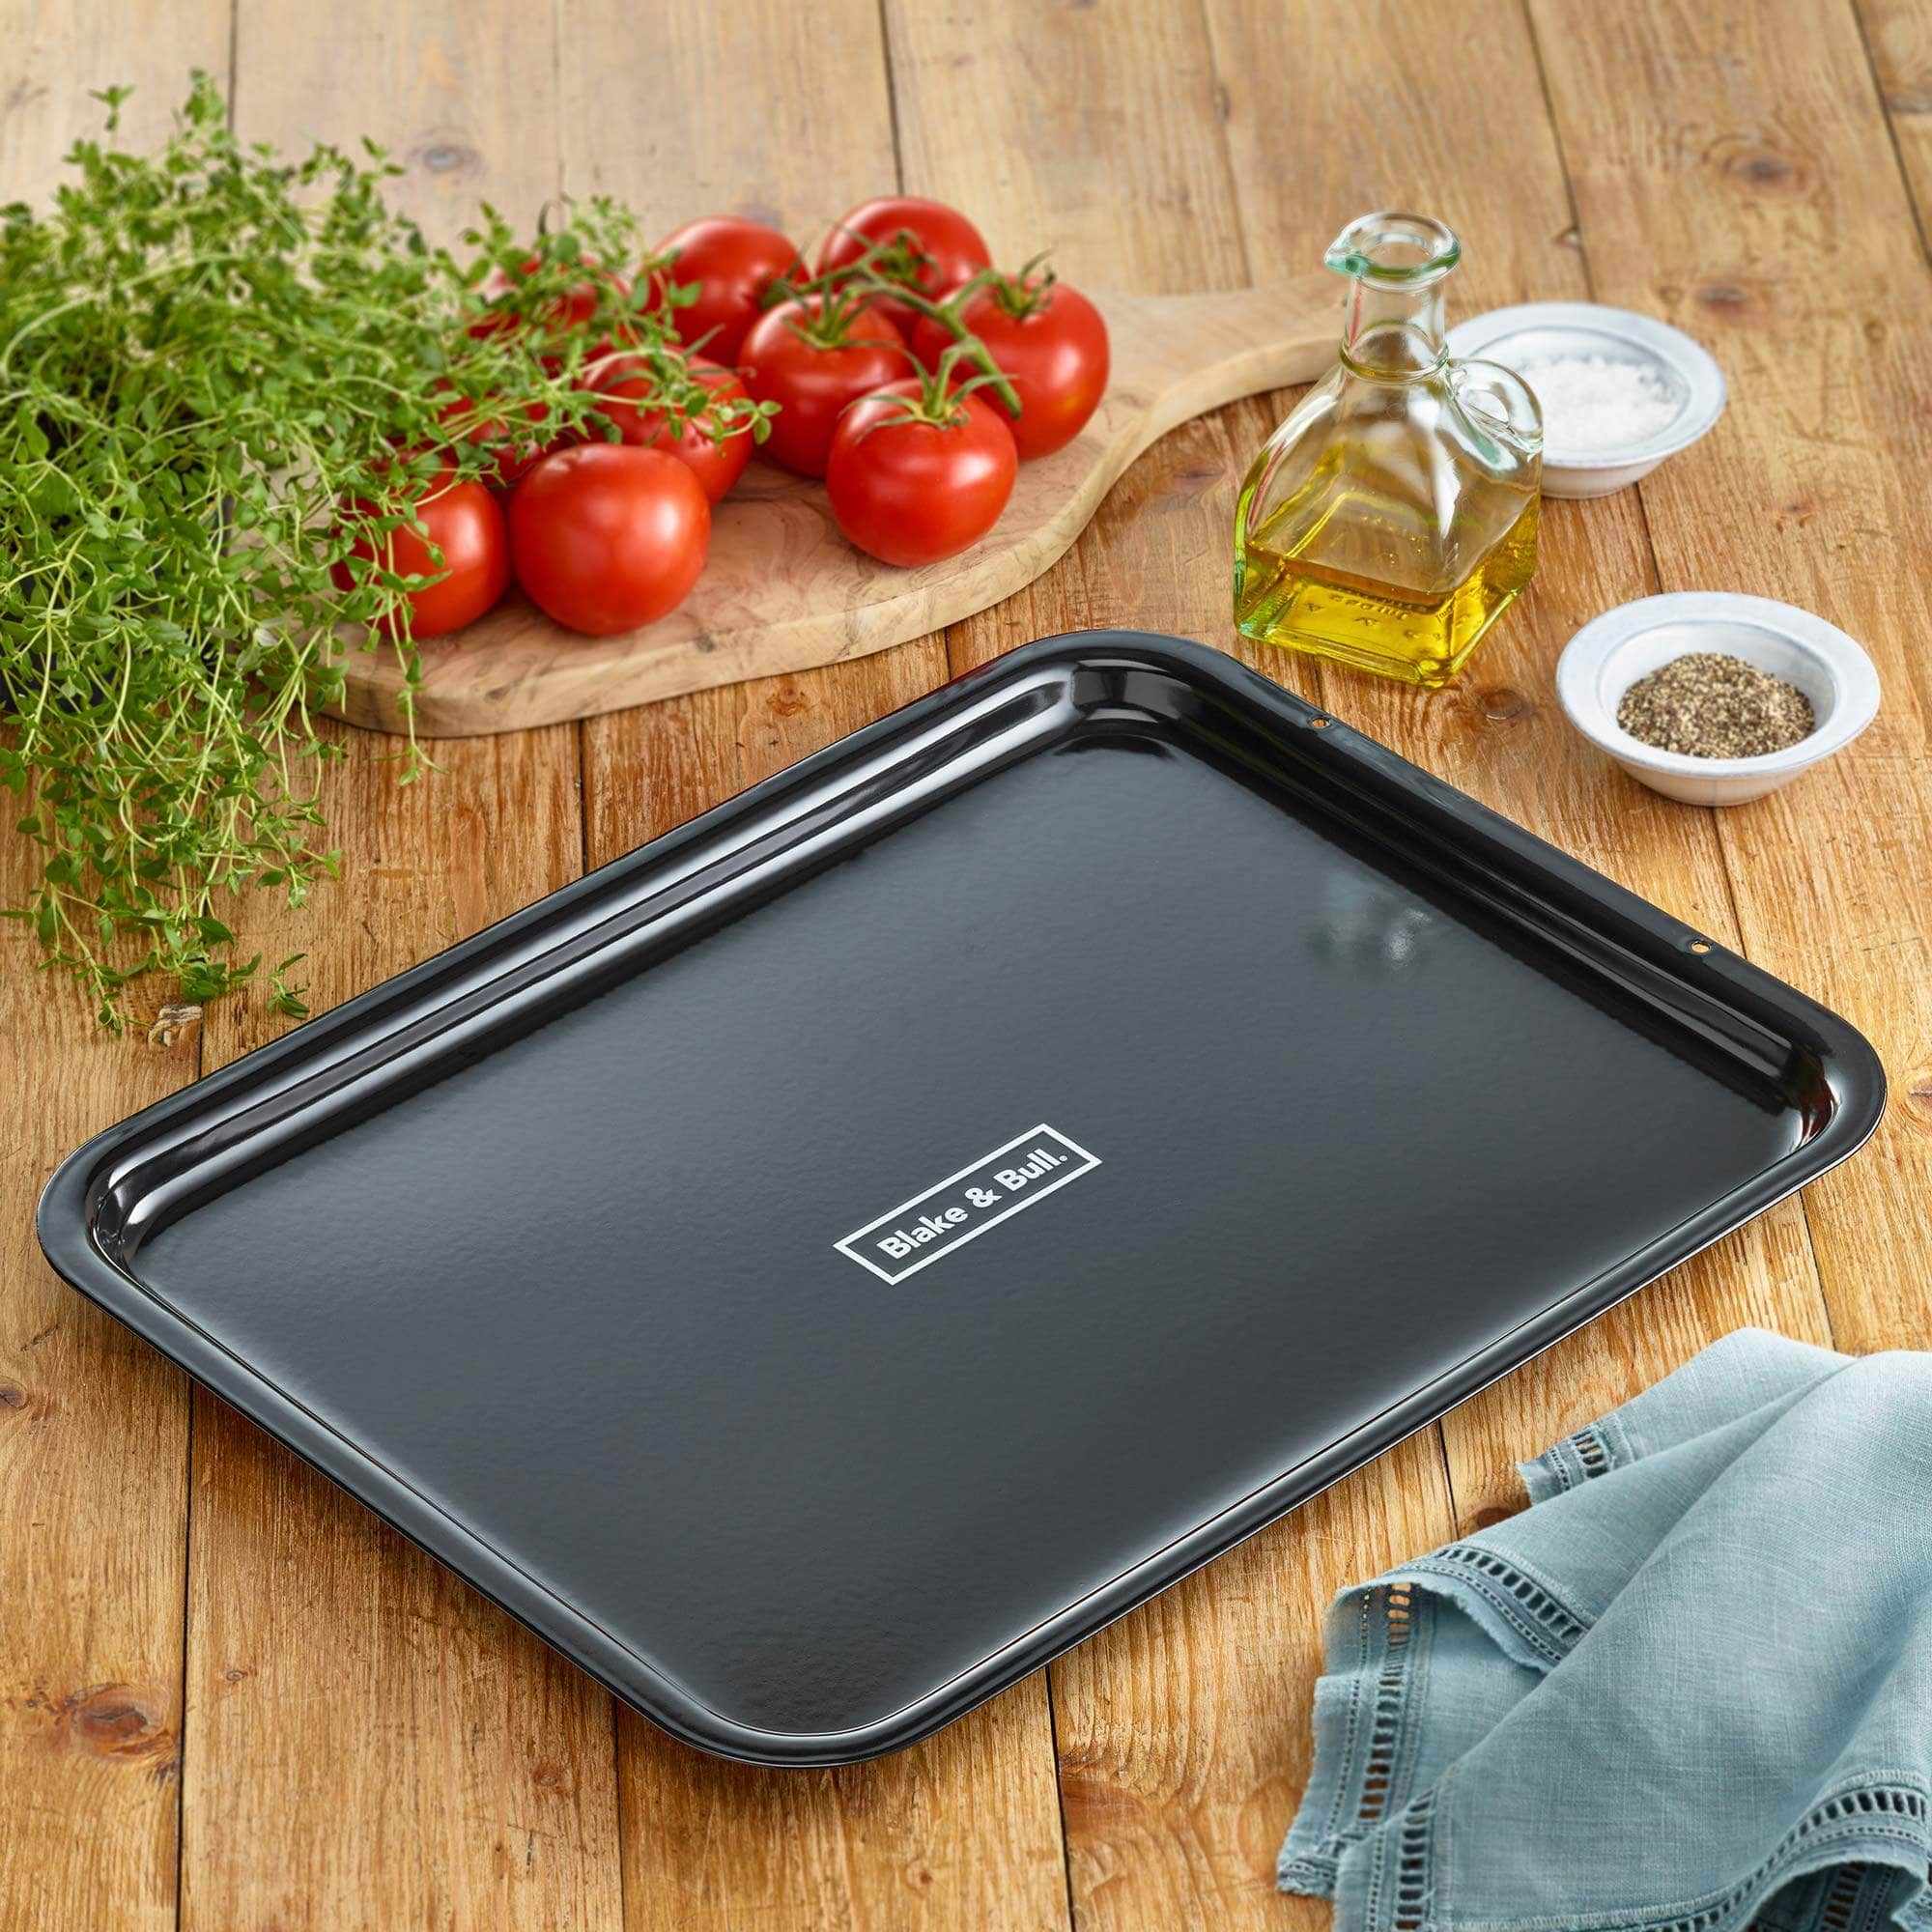 'Fits on runners' black enamelled baking tray for use with Aga range cookers 'full oven' size